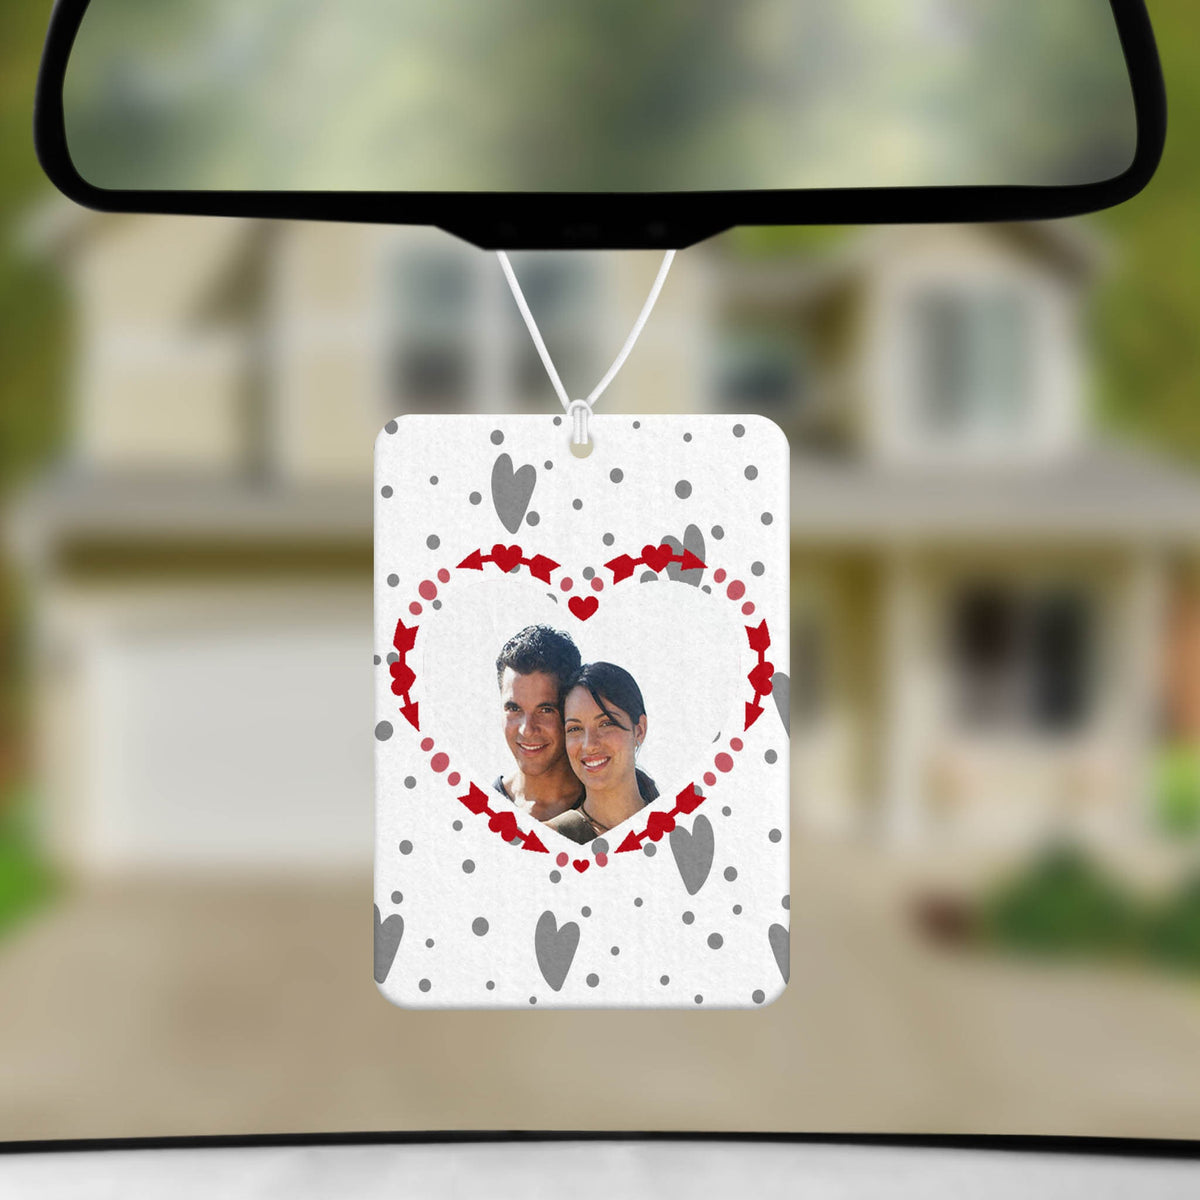 Personalized Air Fresheners | Set of 2 | Custom Car Accessories | Love Birds